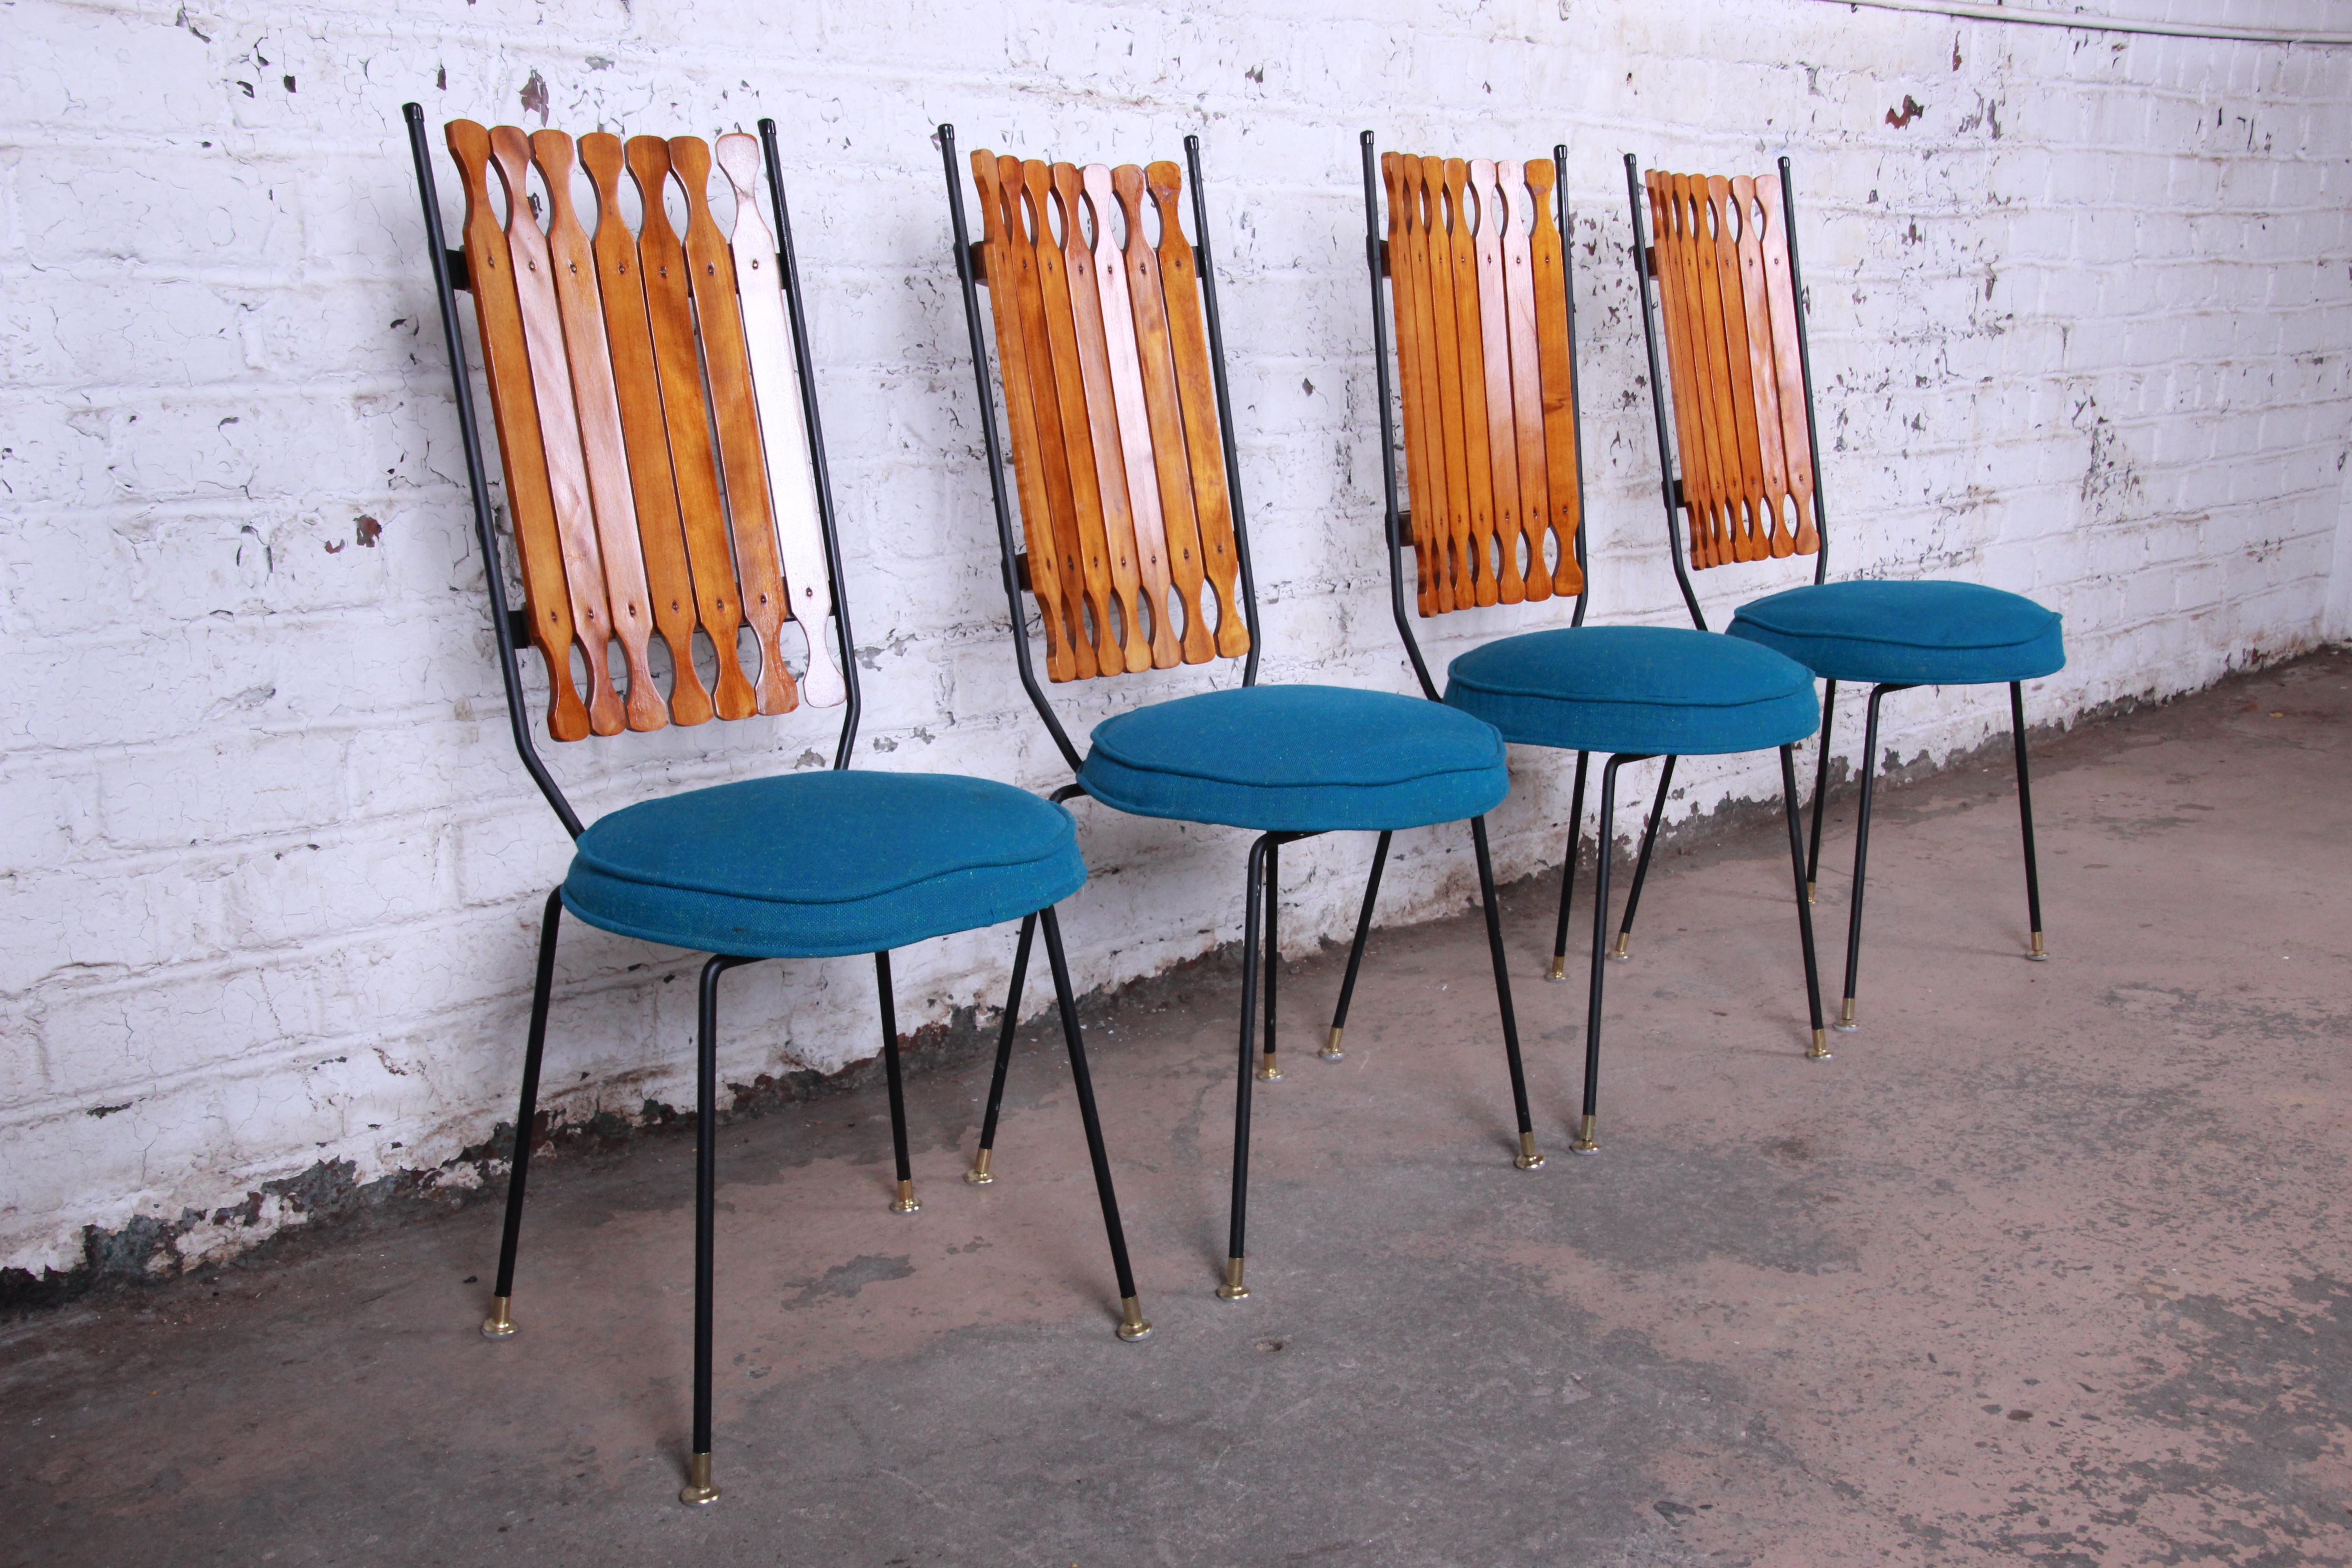 Offering a rare and unique set of four Mid-Century Modern iron, wood, and upholstered high back dining chairs designed by Arthur Umanoff for Shaver-Howard. The chairs feature sturdy black iron frames, unique slatted wood seat backs, and newer teal